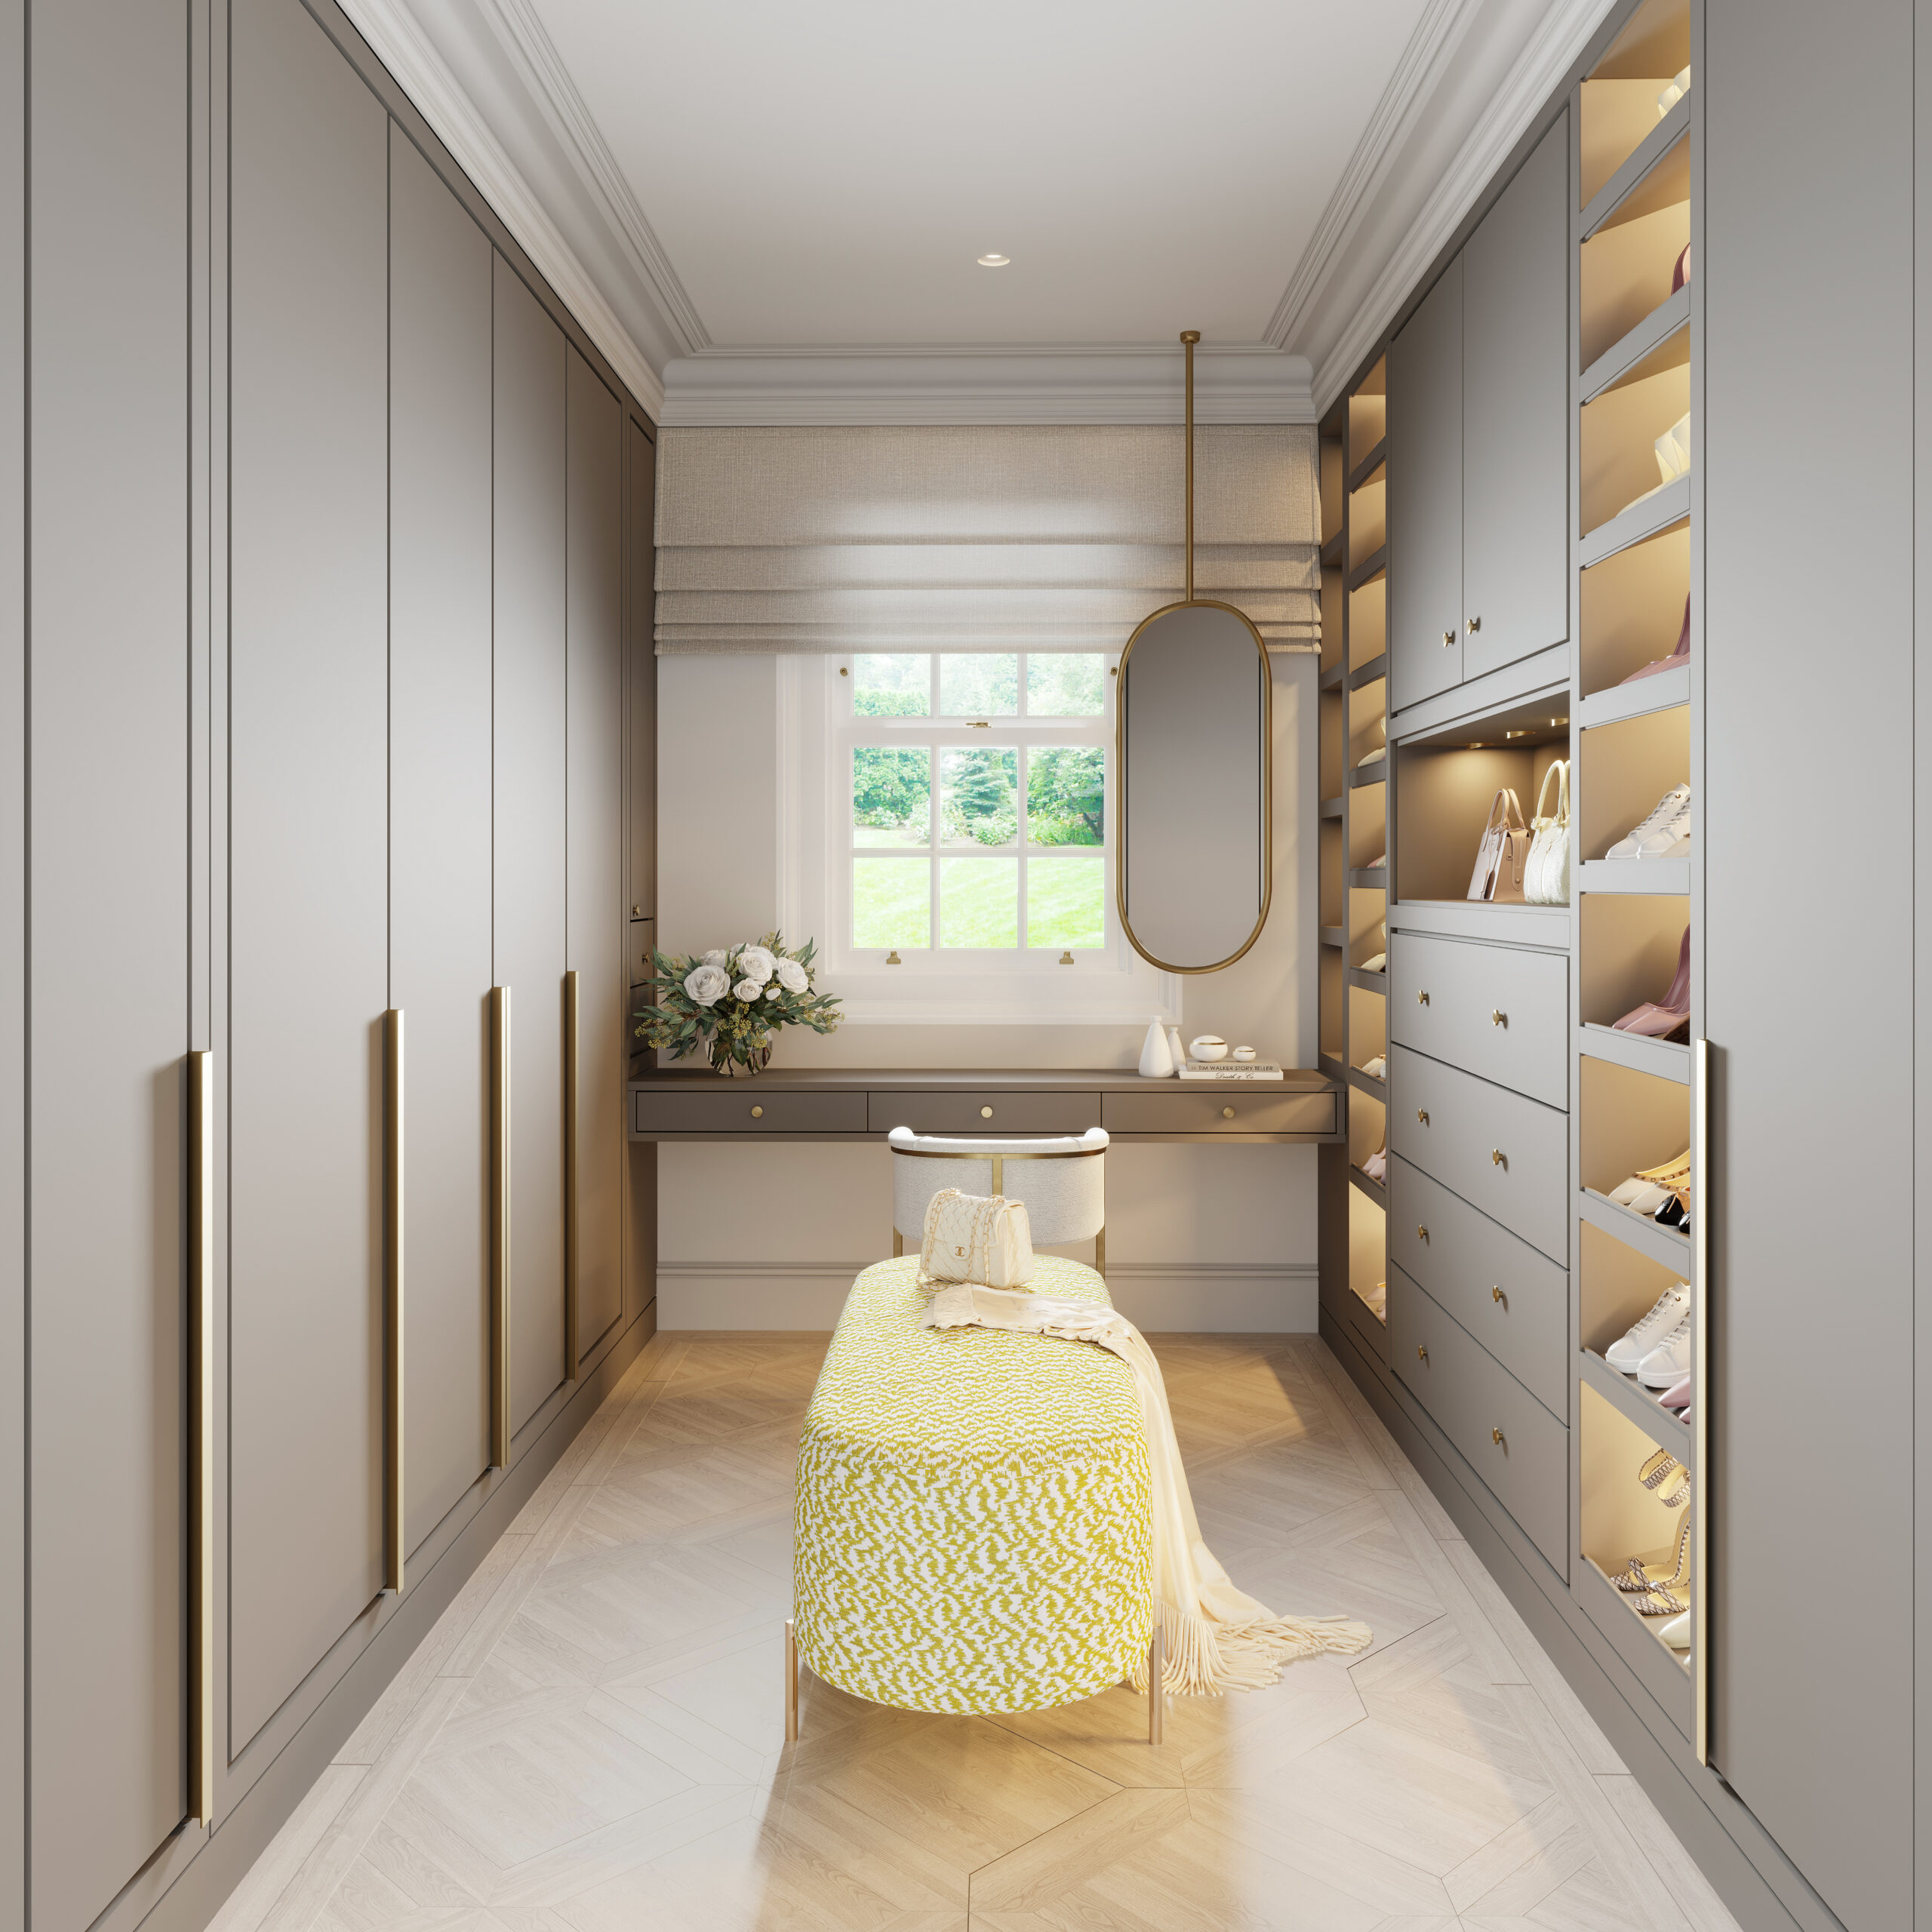 Bespoke joinery dressing room with parquet timber flooring - Edwardian Arts and Craft Villa